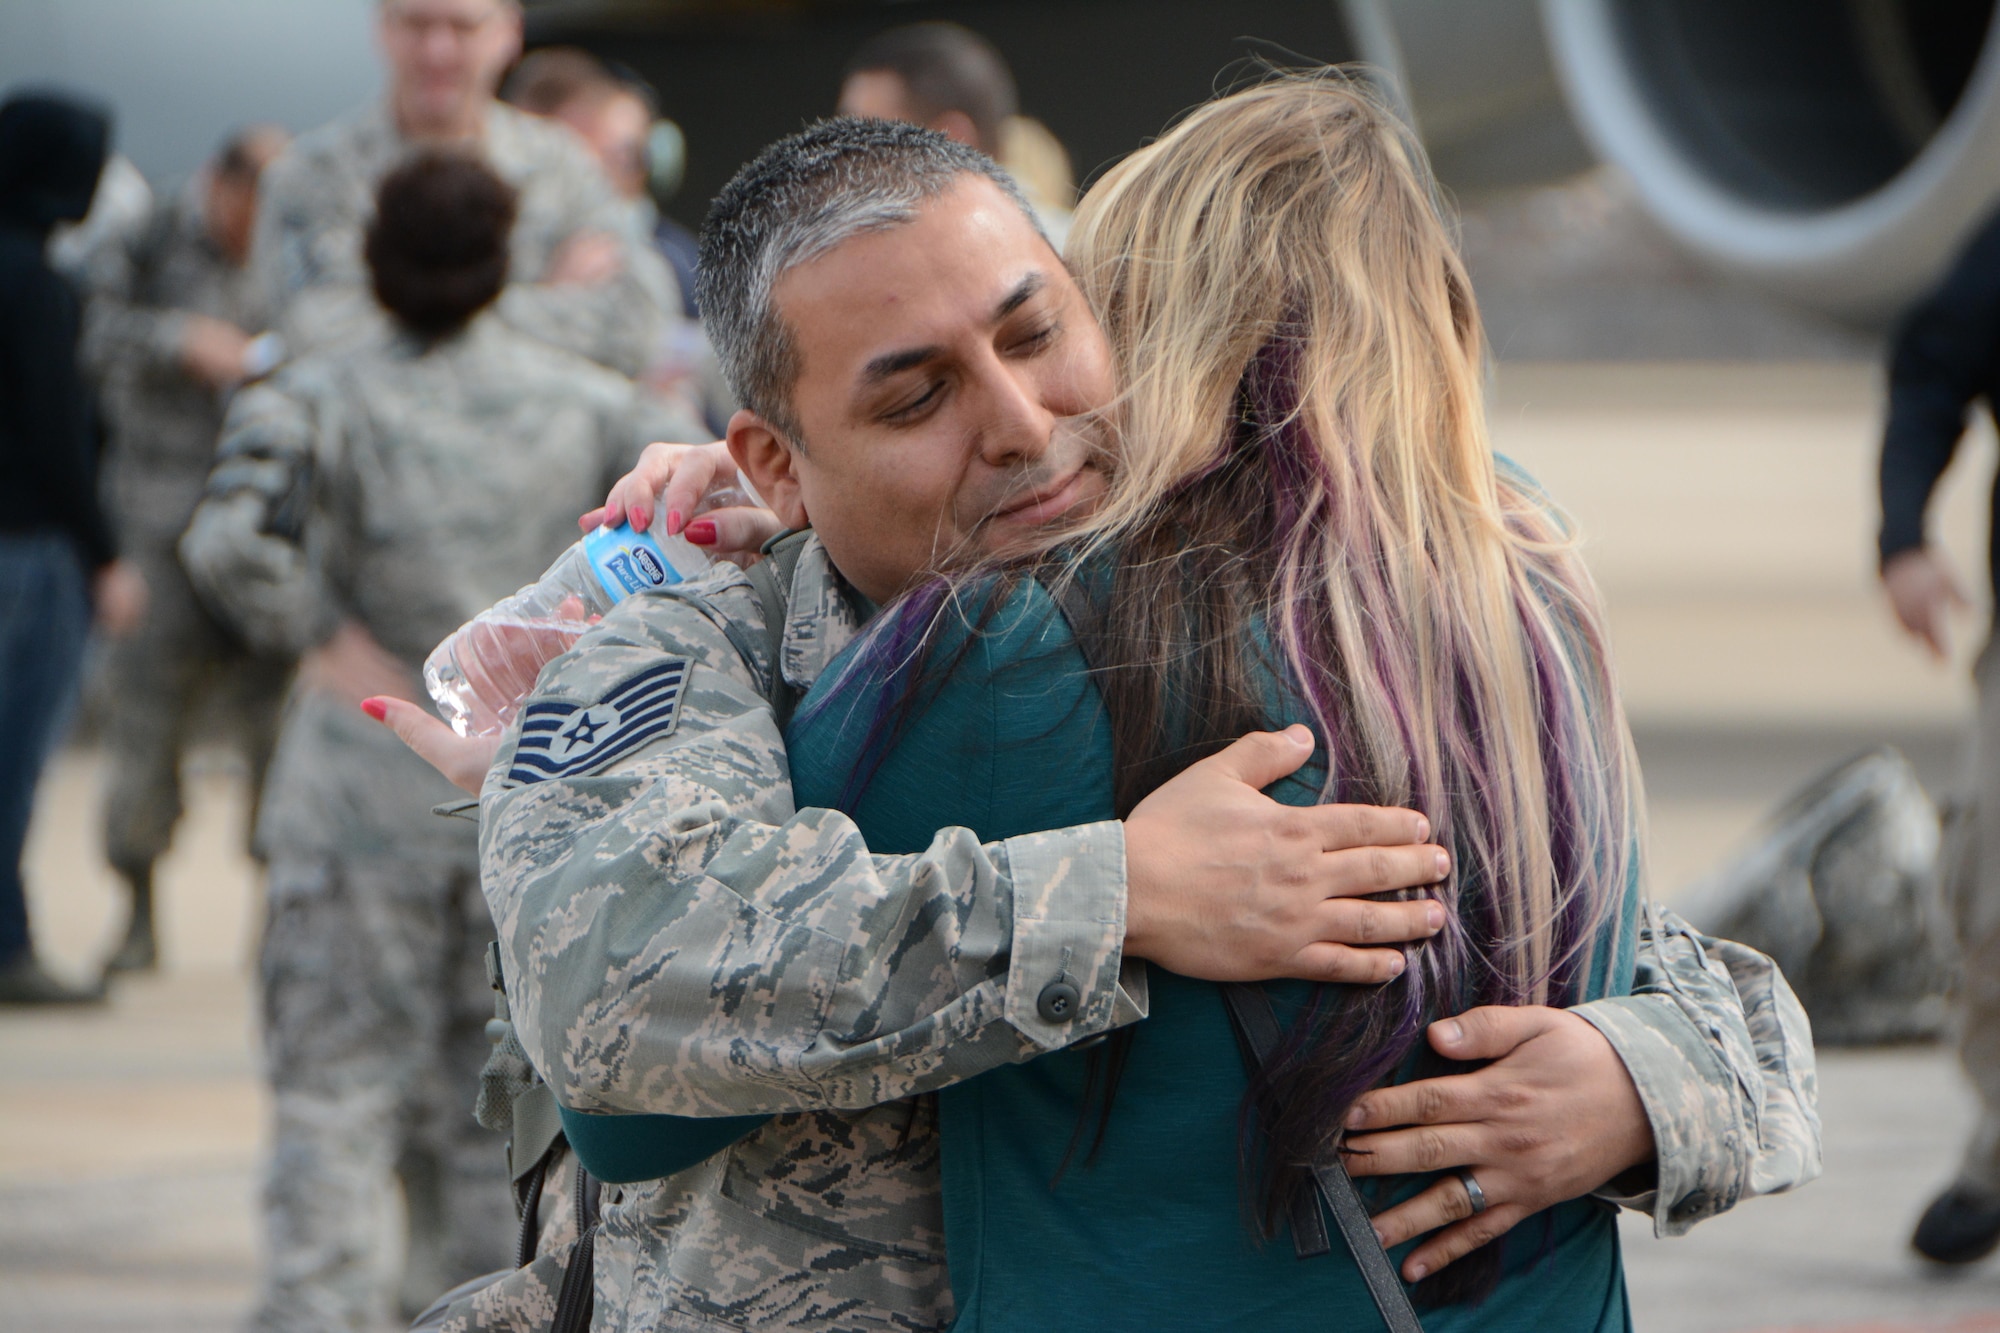 Tech. Sgt. Gabriel Padilla of the 507th Operations Support Squadron embraces his wife following a deployment Feb. 17, 2017, at Tinker Air Force Base, Okla. More than 90 Reservists deployed in December 2016 in support of air operations at Incirlik Air Base, Turkey, against the Islamic State group. (U.S. Air Force photo/Tech. Sgt. Lauren Gleason)